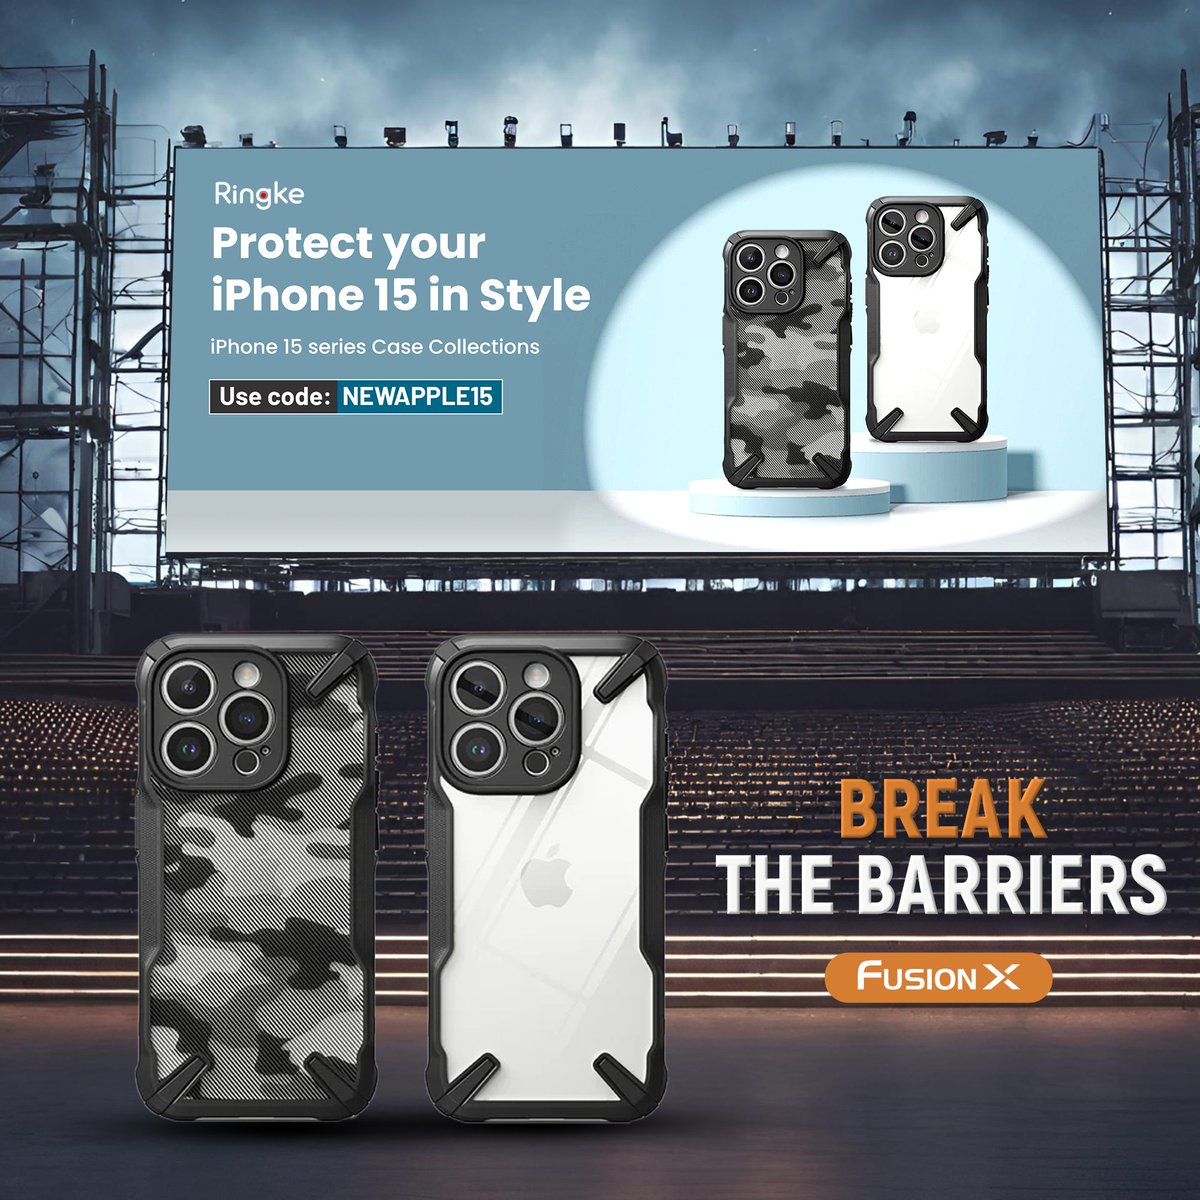 💥 BREAK THE BARRIERS with Ringke's iPhone 15 Series Fusion X Cases – where style meets ultimate protection! 
#iphone15promax #ringkecase #iphonecase #ringkeonyxcase #iphone15procase #iphone15proonyxcase #iphone15promax #iphone15pro #onyxcases #mobileaccessories